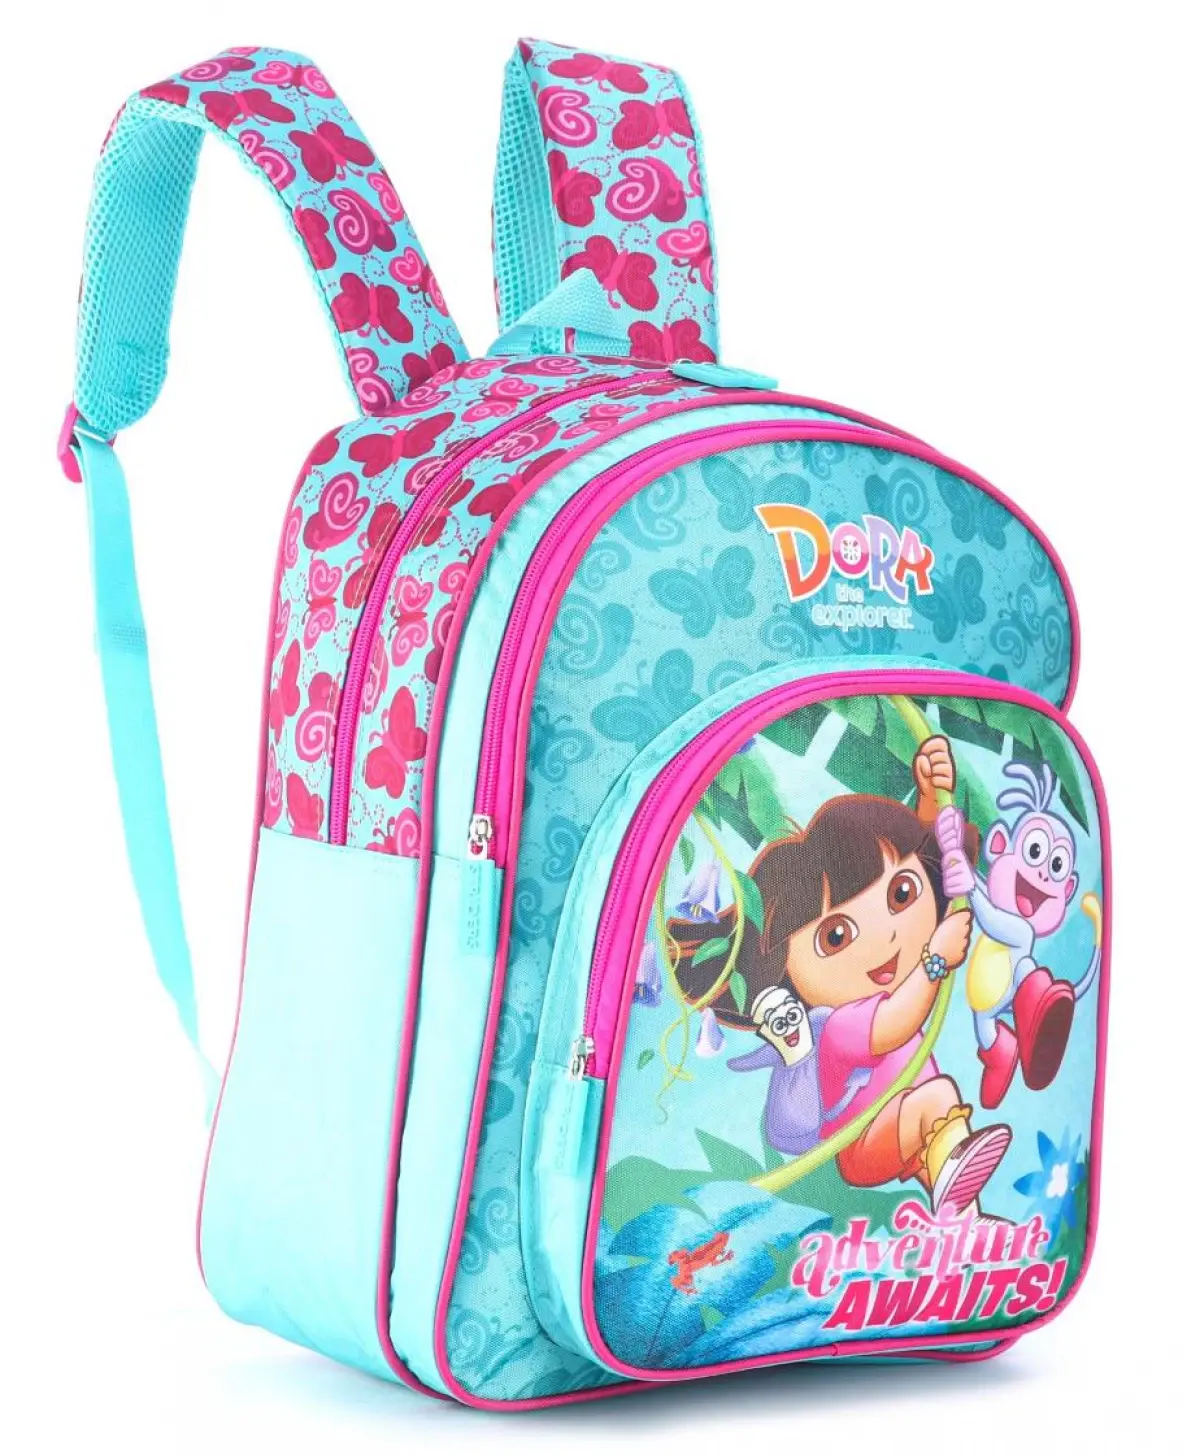 Striders 16 inches Dora the Explorer-Inspired School Bag for Young Adventurers Multicolour For Kids Ages 6Y+